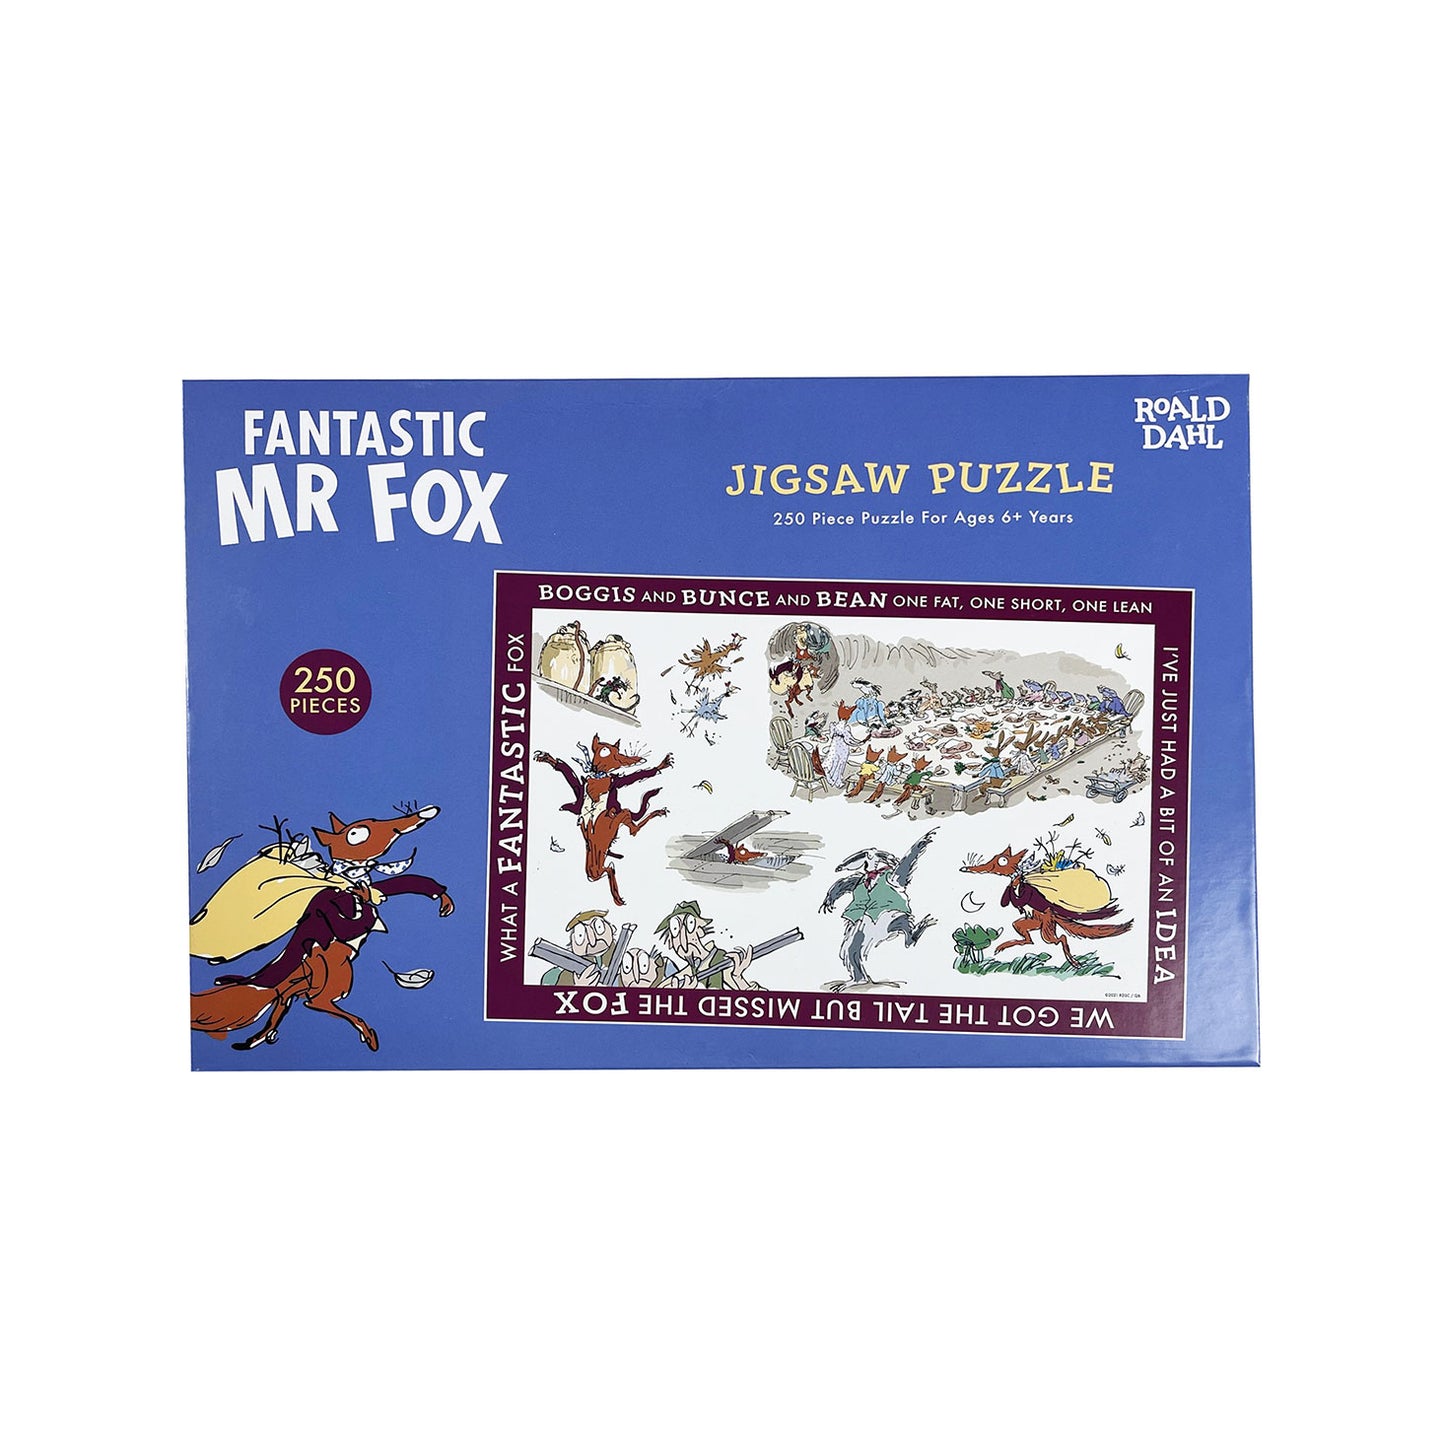 Fantastic Mr Fox Jigsaw Puzzle based on Roald Dahl with illustrations by Quentin Blake